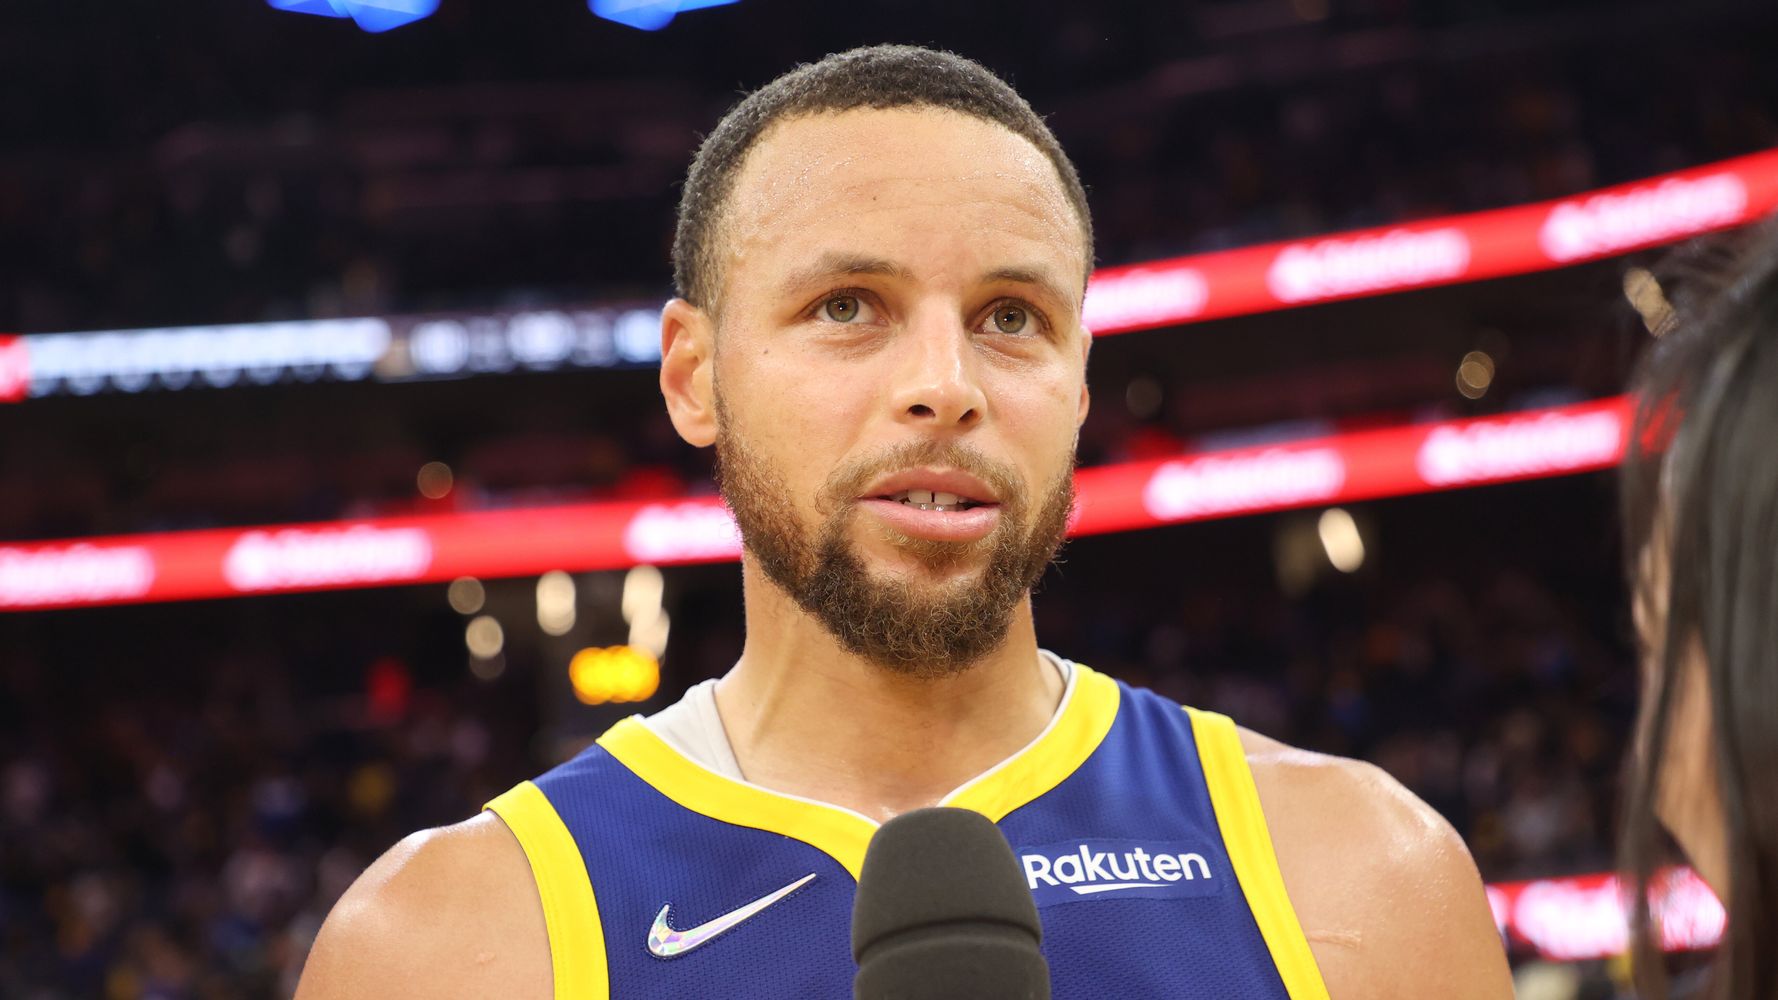 Stephen Curry graduated from Davidson College and received his diploma at the age of 34